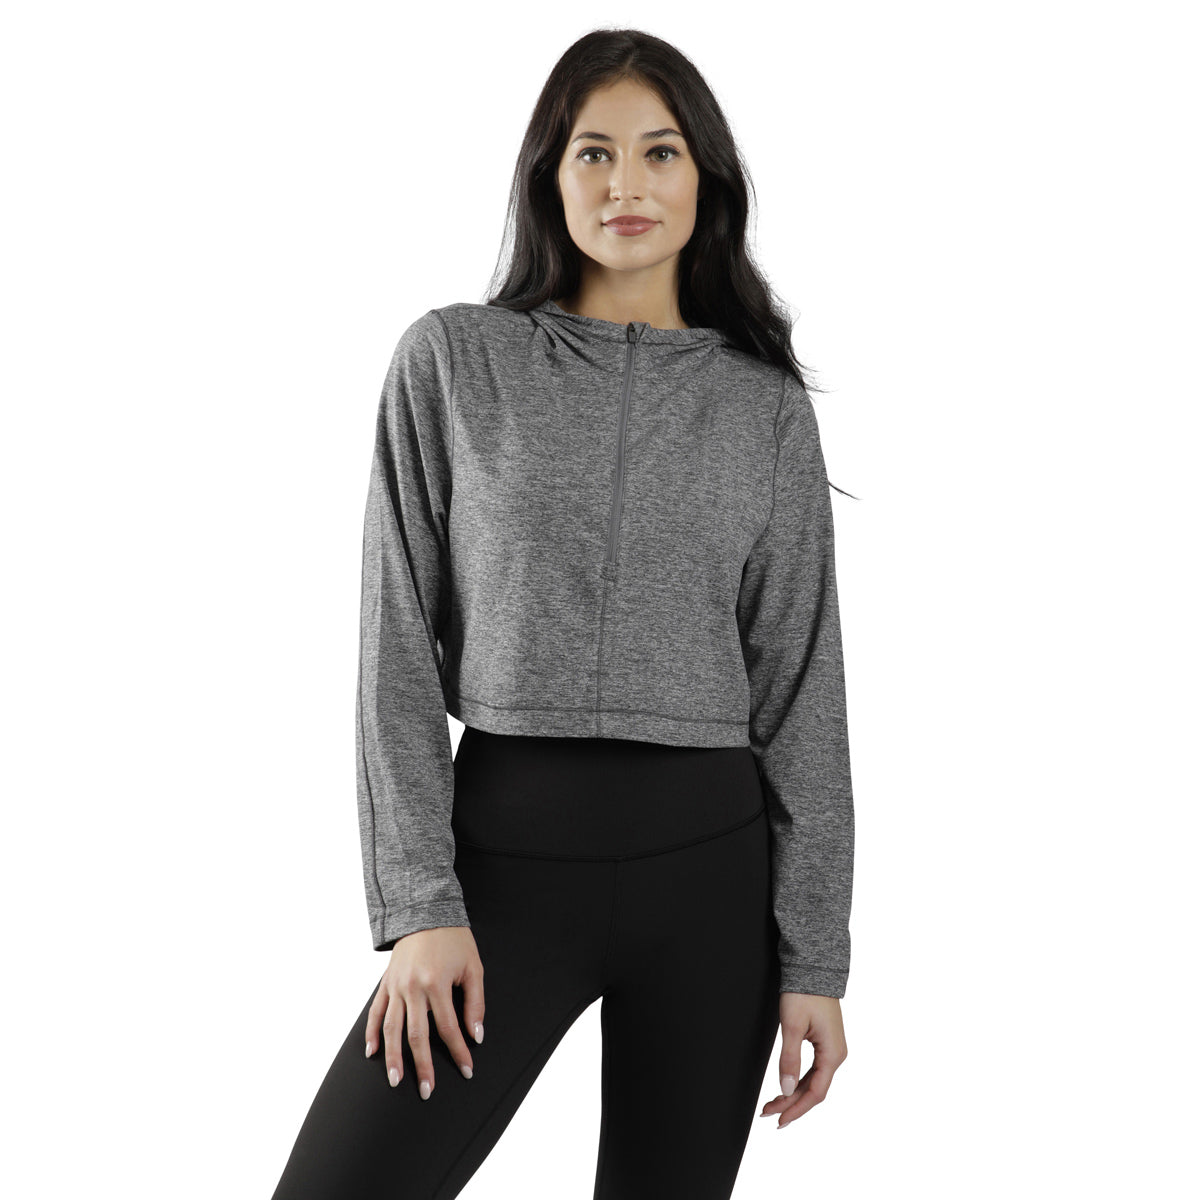 90 Degree By Reflex Casual Athletic Hoodies for Women